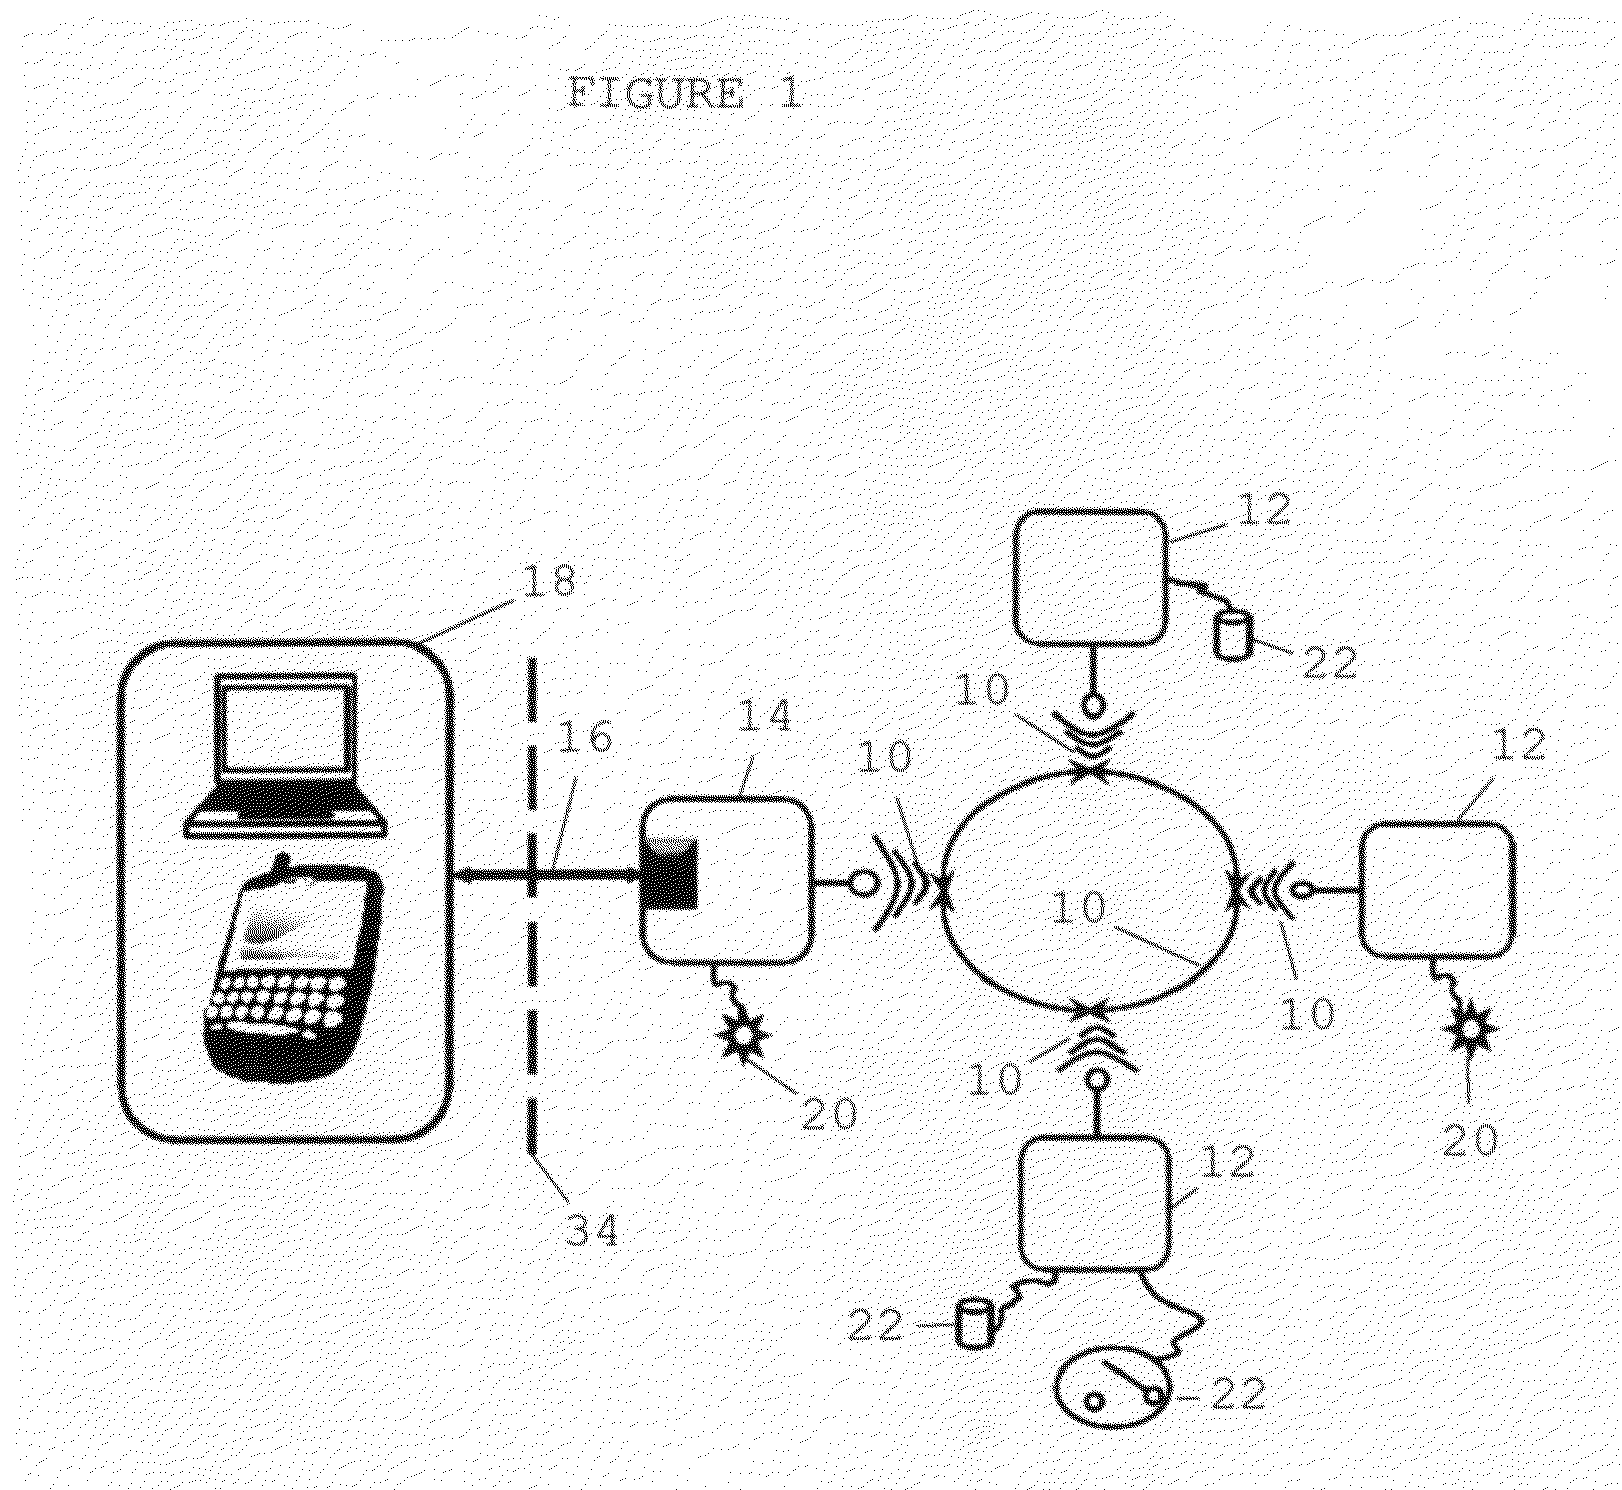 Relative response system including reprogramming capability for autonomous or interrelated stimulus and sensor systems for measuring biological response data relative to either an absolute reference and/or relative to other biological response